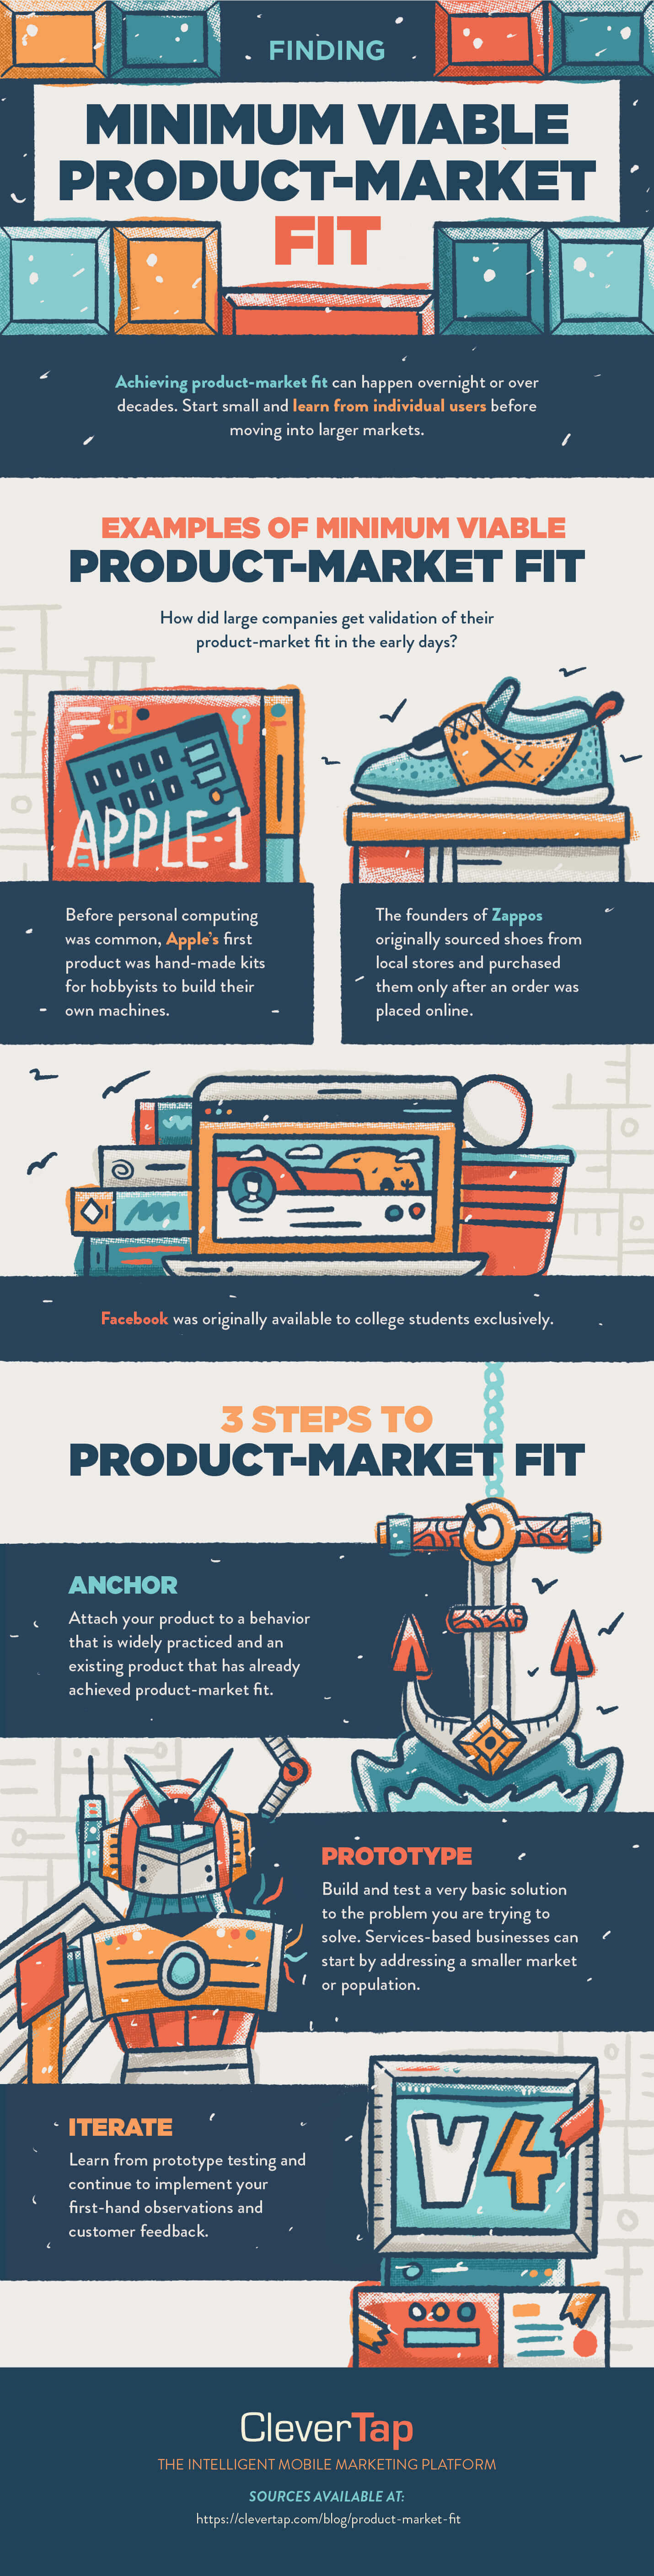 finding minimum viable product market fit infographic